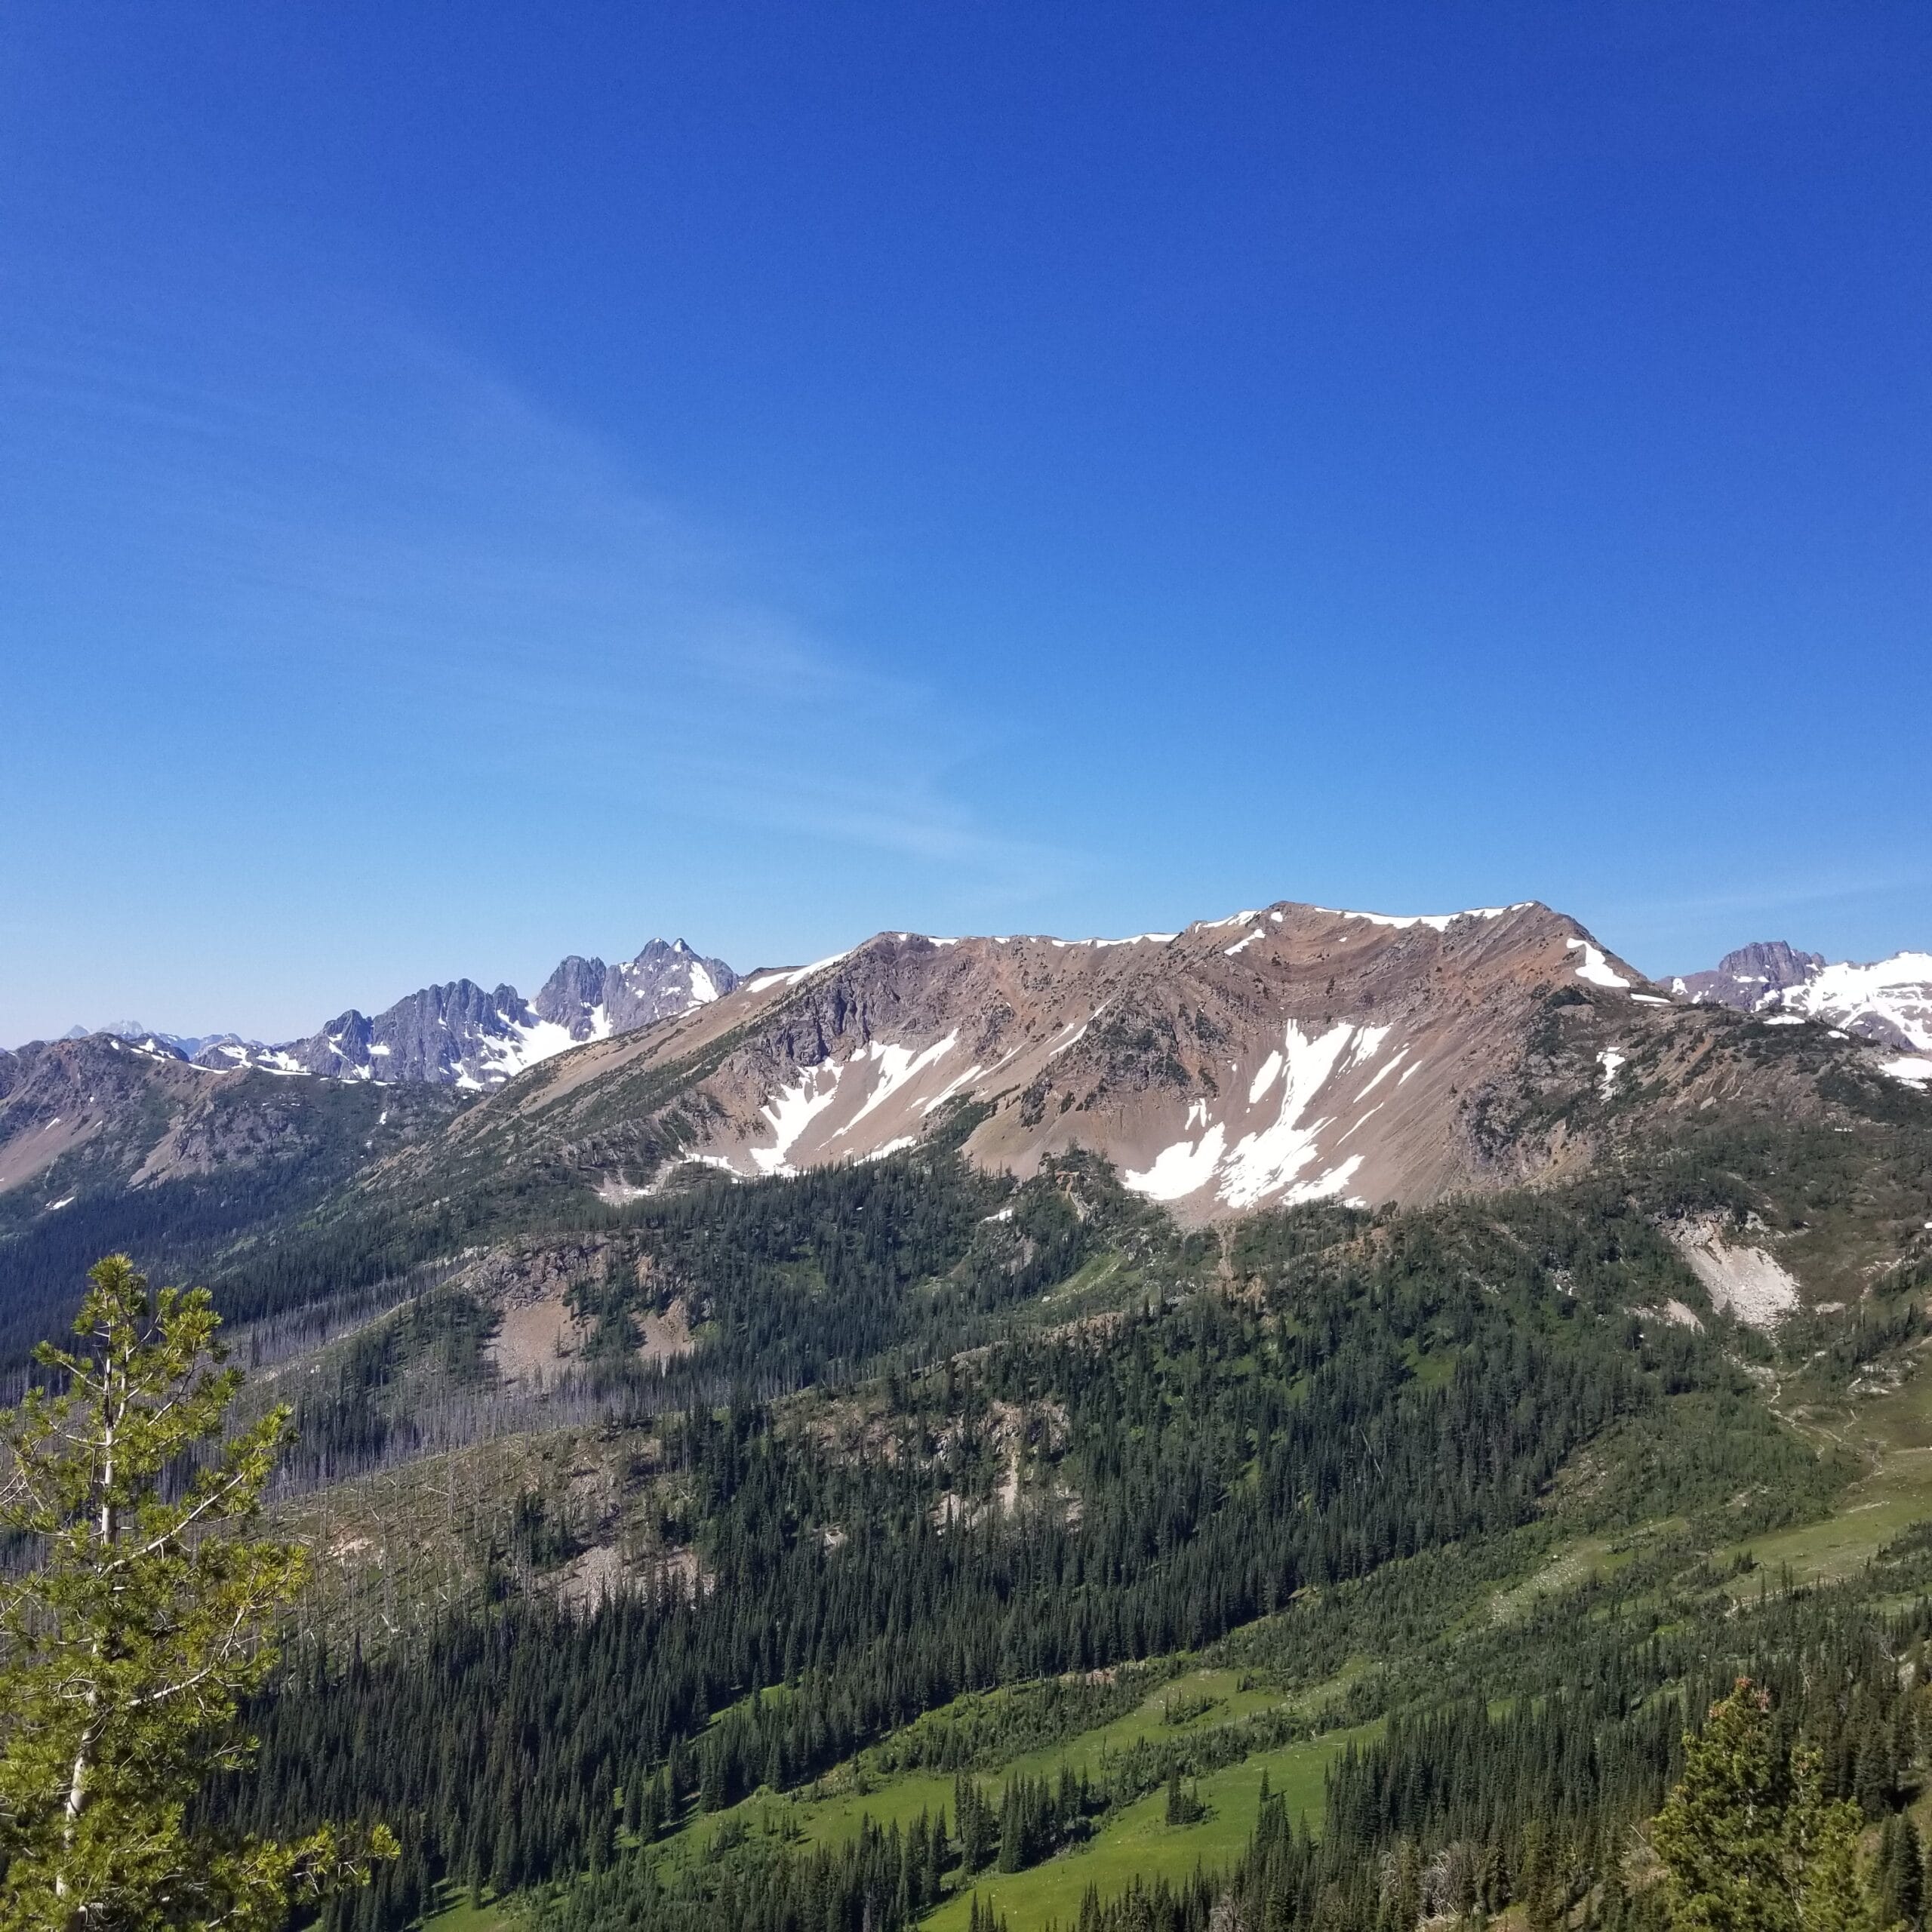 Looking at Grasshopper Pass from PCT South - July 24th